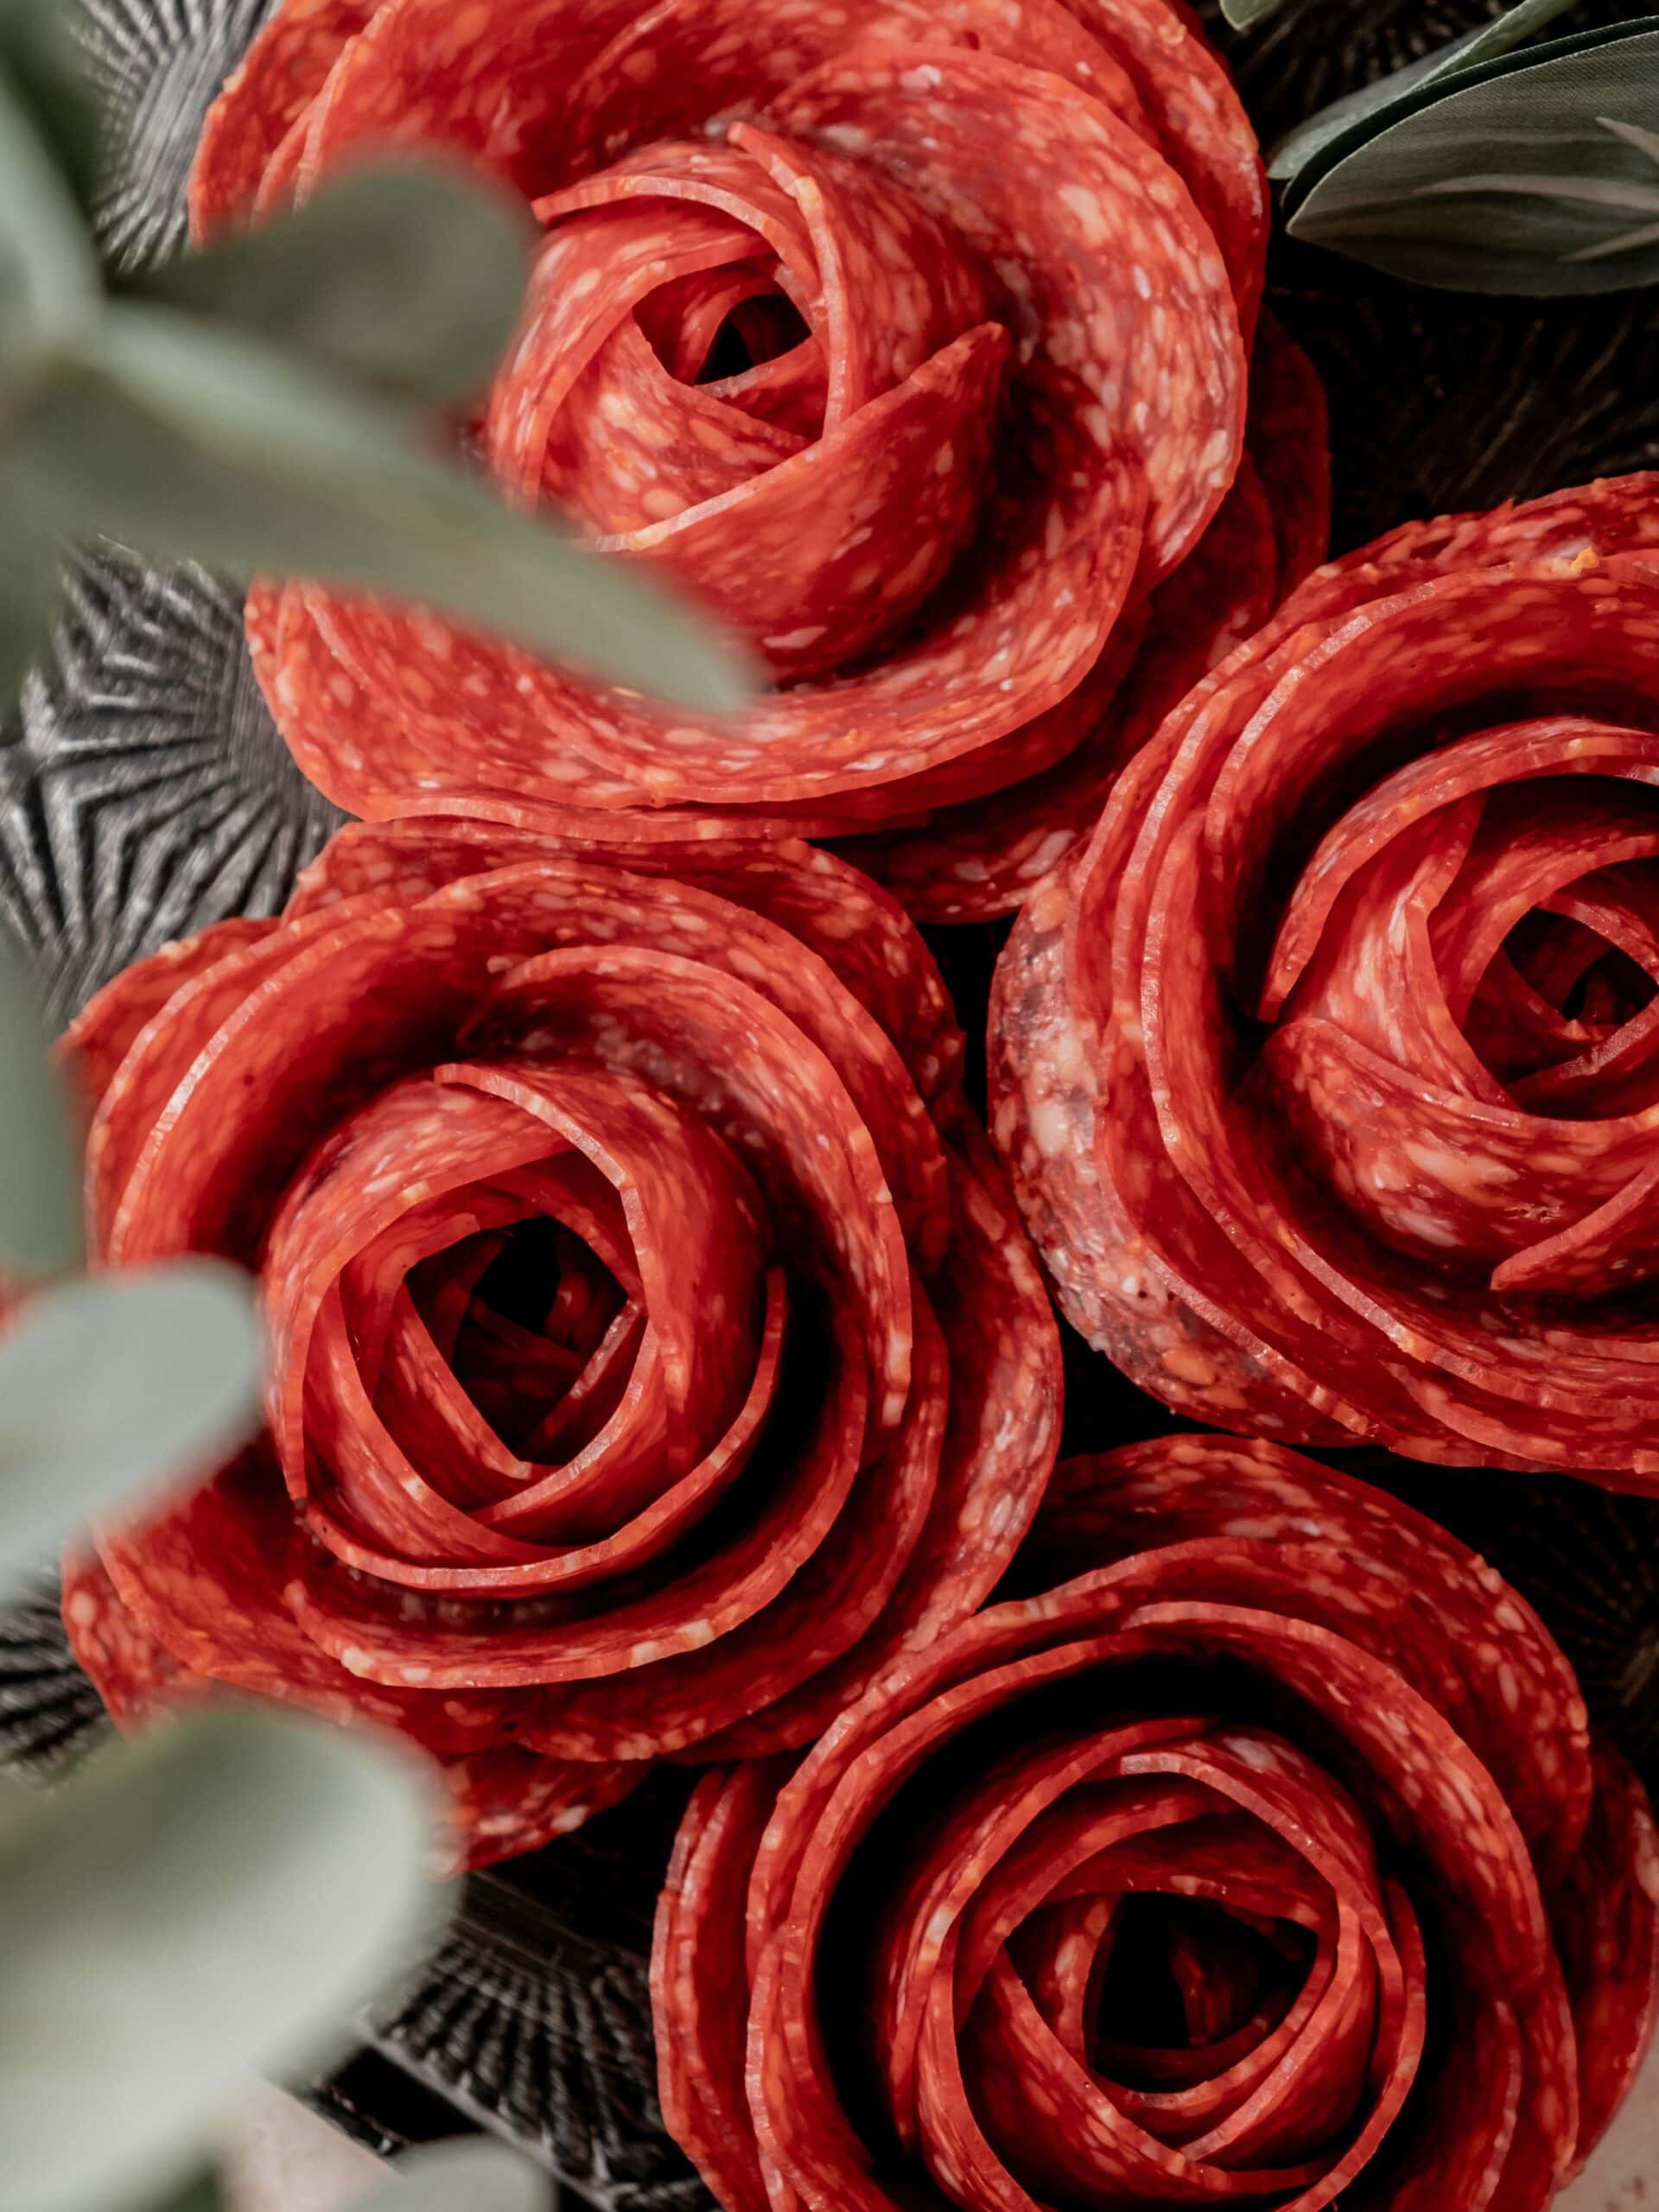 Four salami roses on a metal tray.